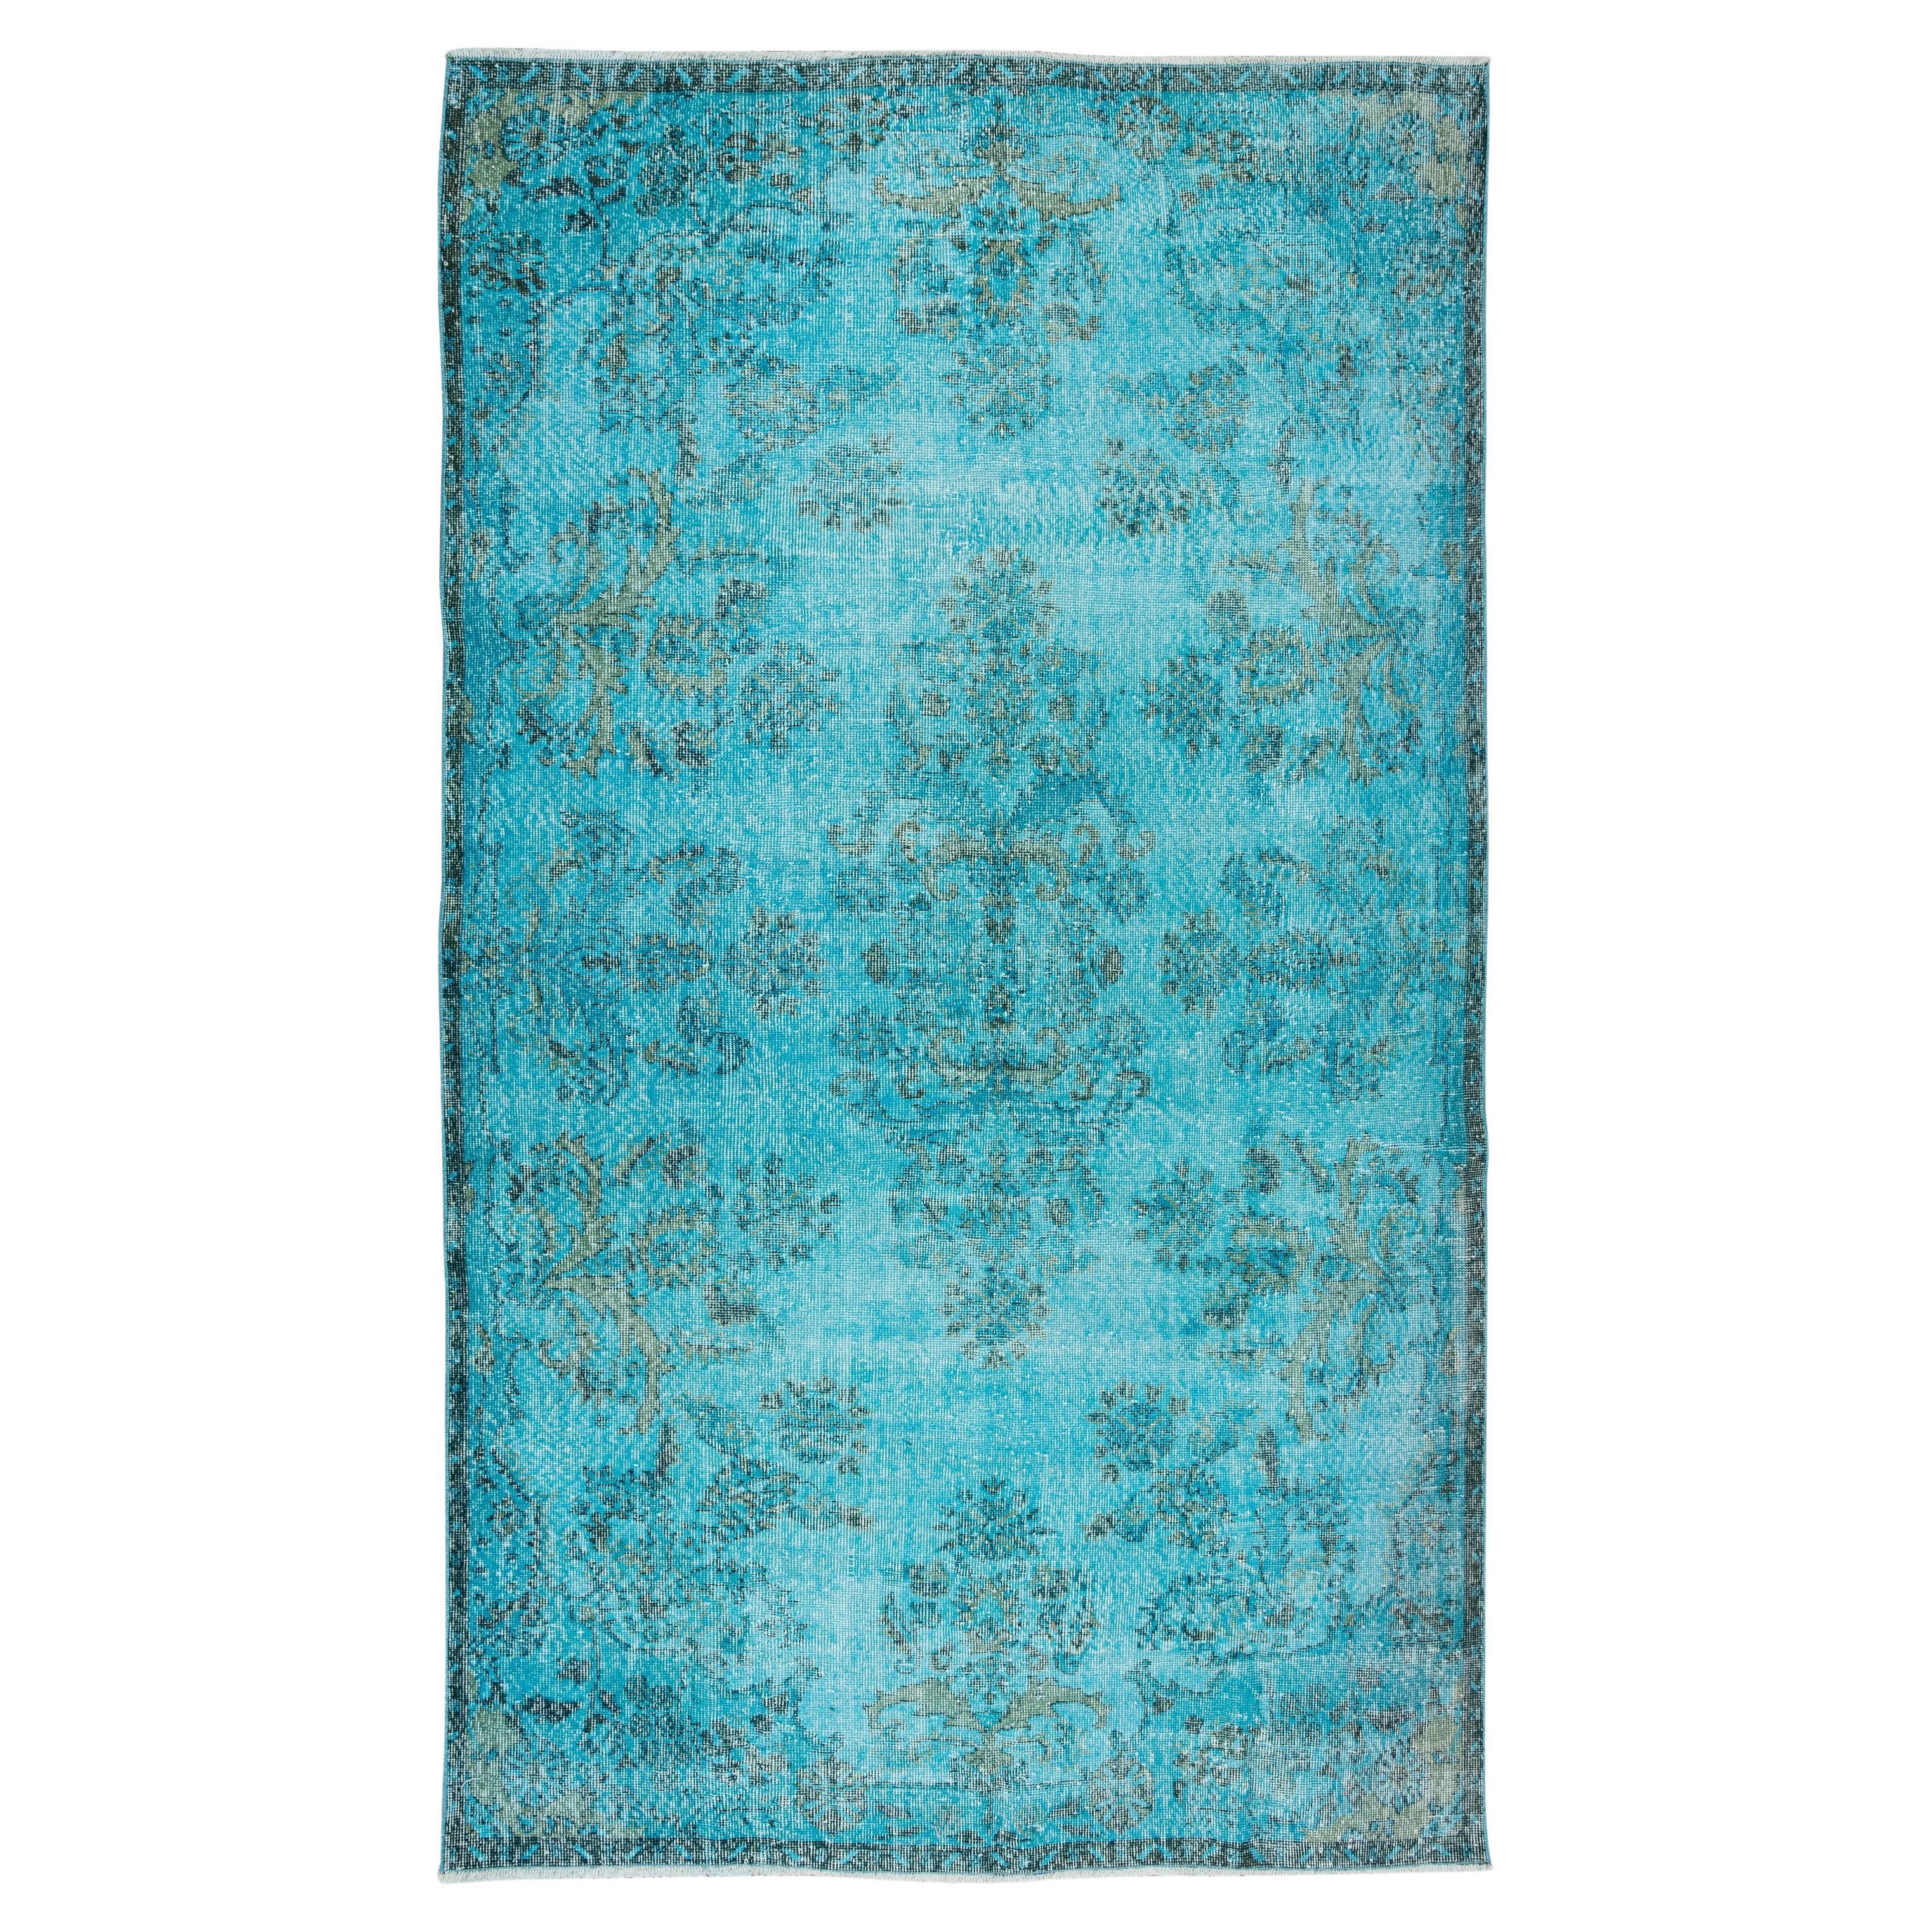 6x10.3 Ft Hand-Knotted Vintage Turkish Rug Over-Dyed in Teal for Modern Interior For Sale